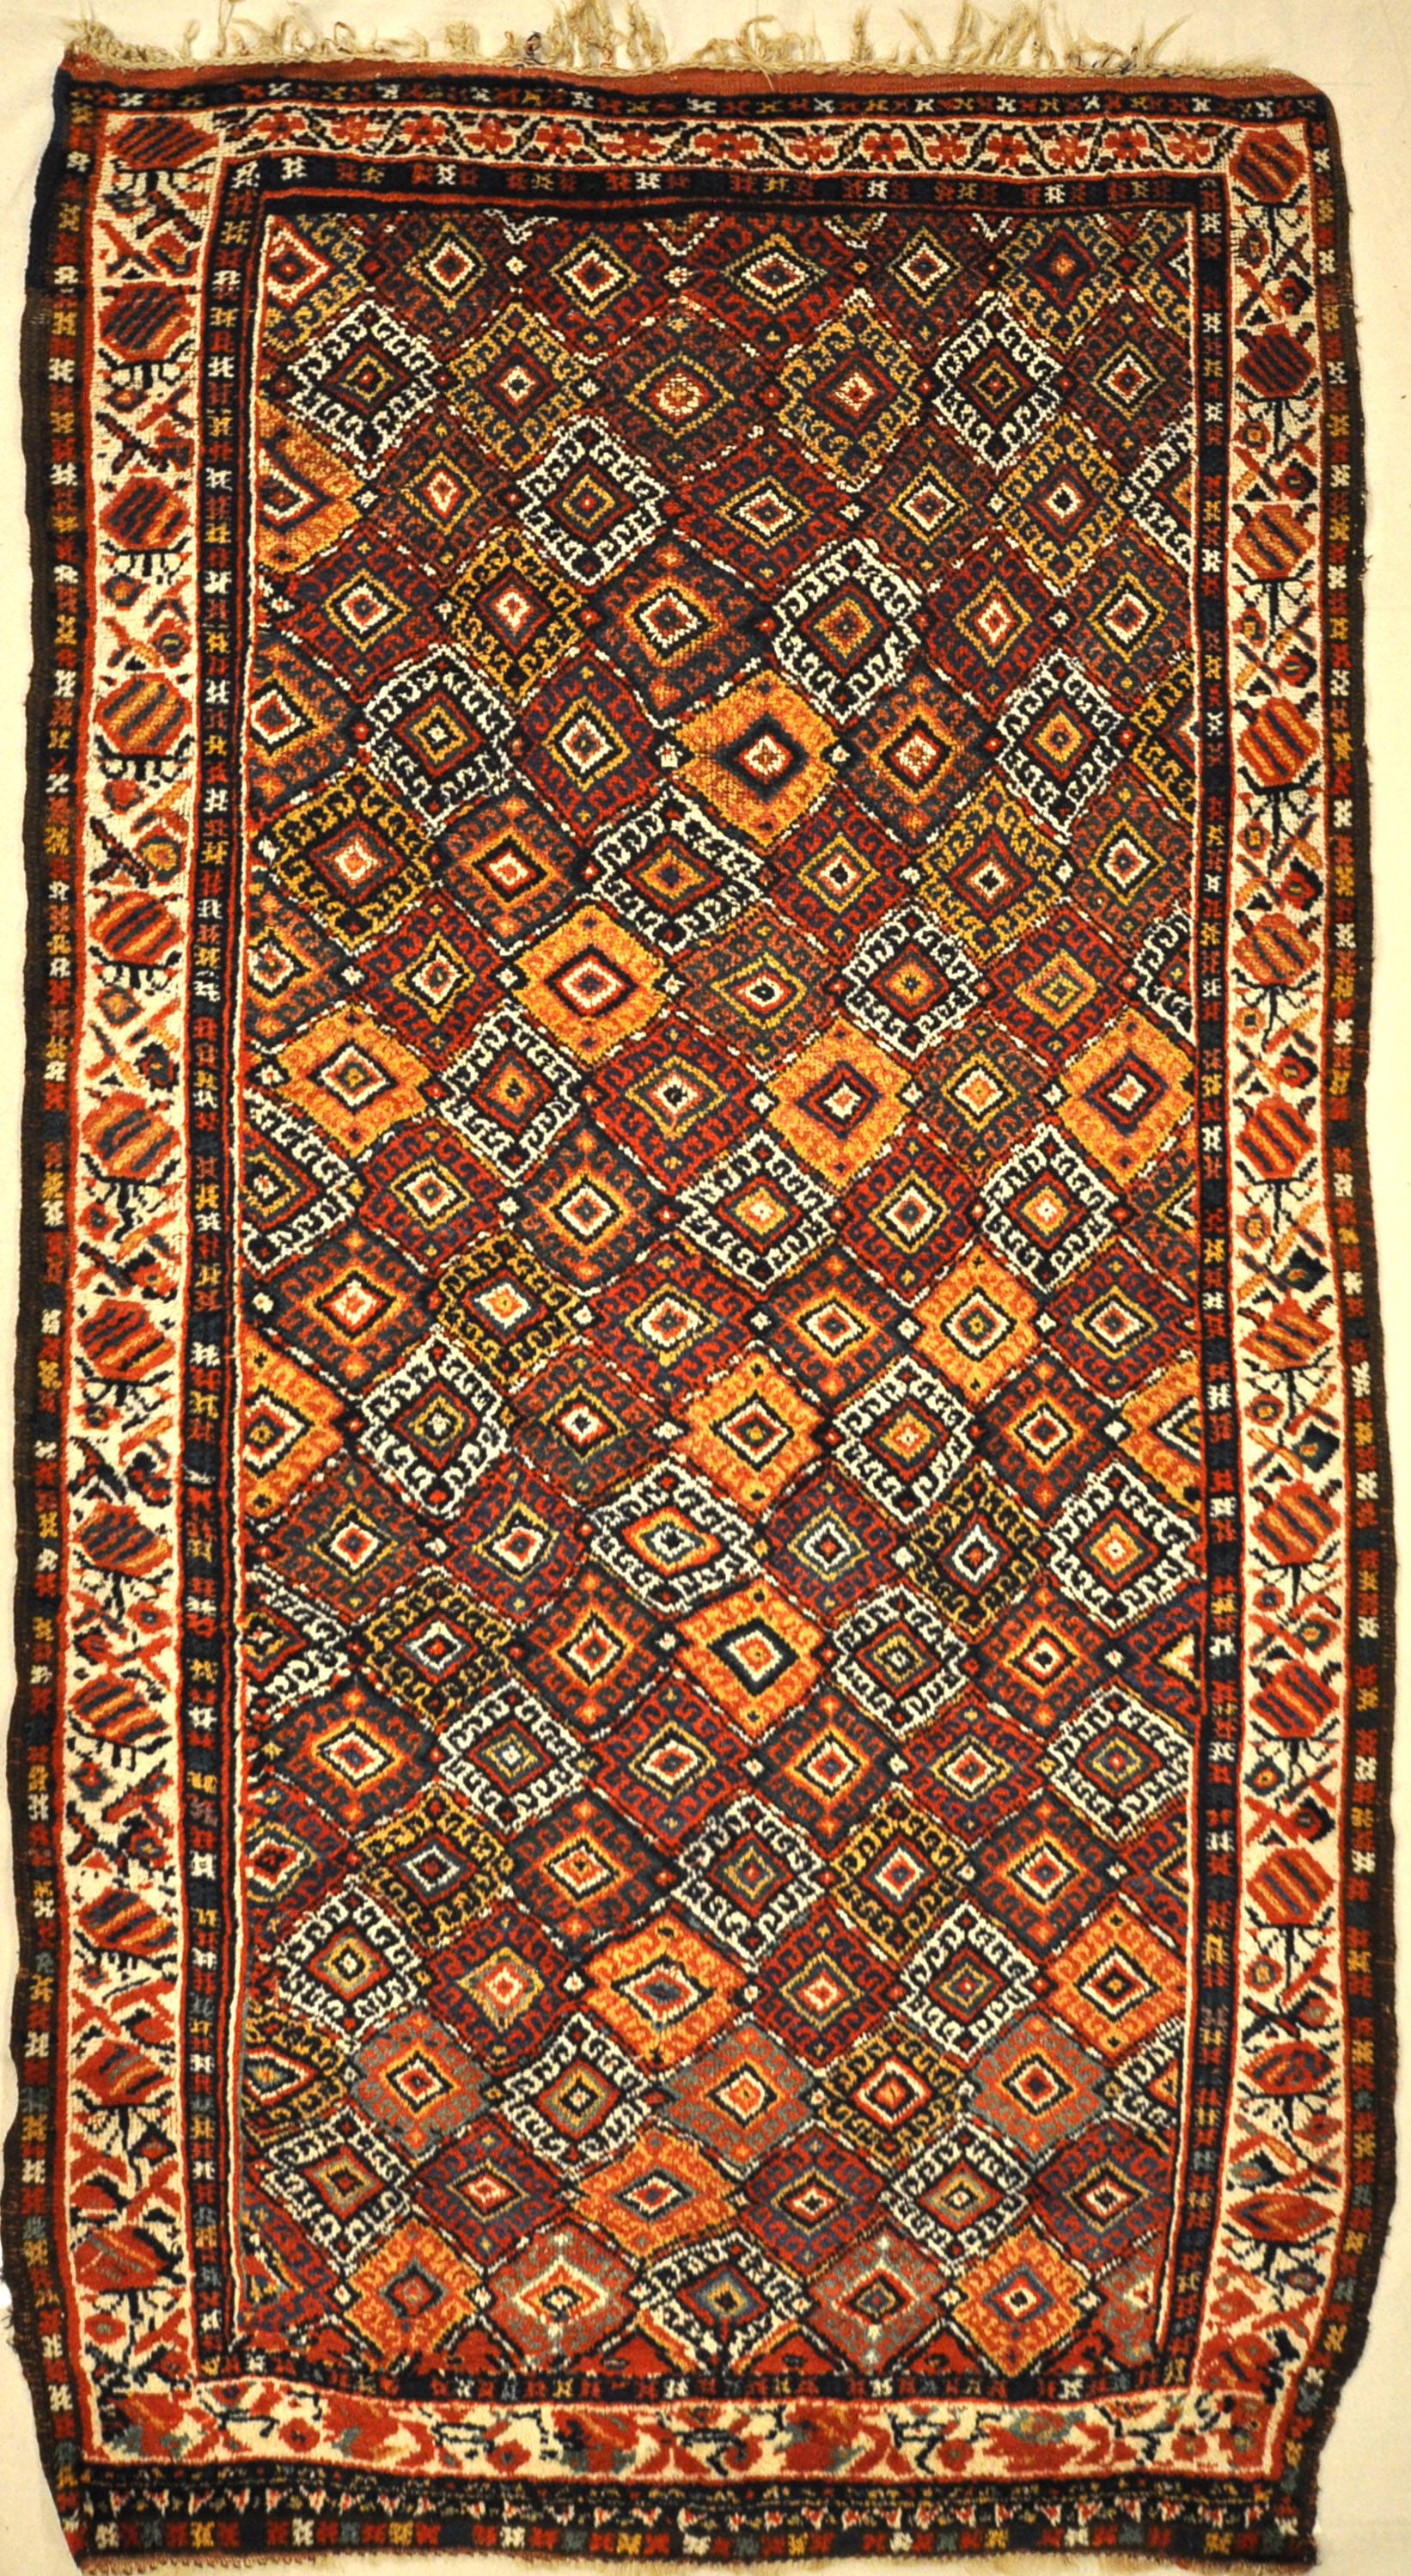 Antique Lori South Persian. A piece of genuine authentic antique woven carpet art sold by Santa Barbara Design Center, Rugs and More.